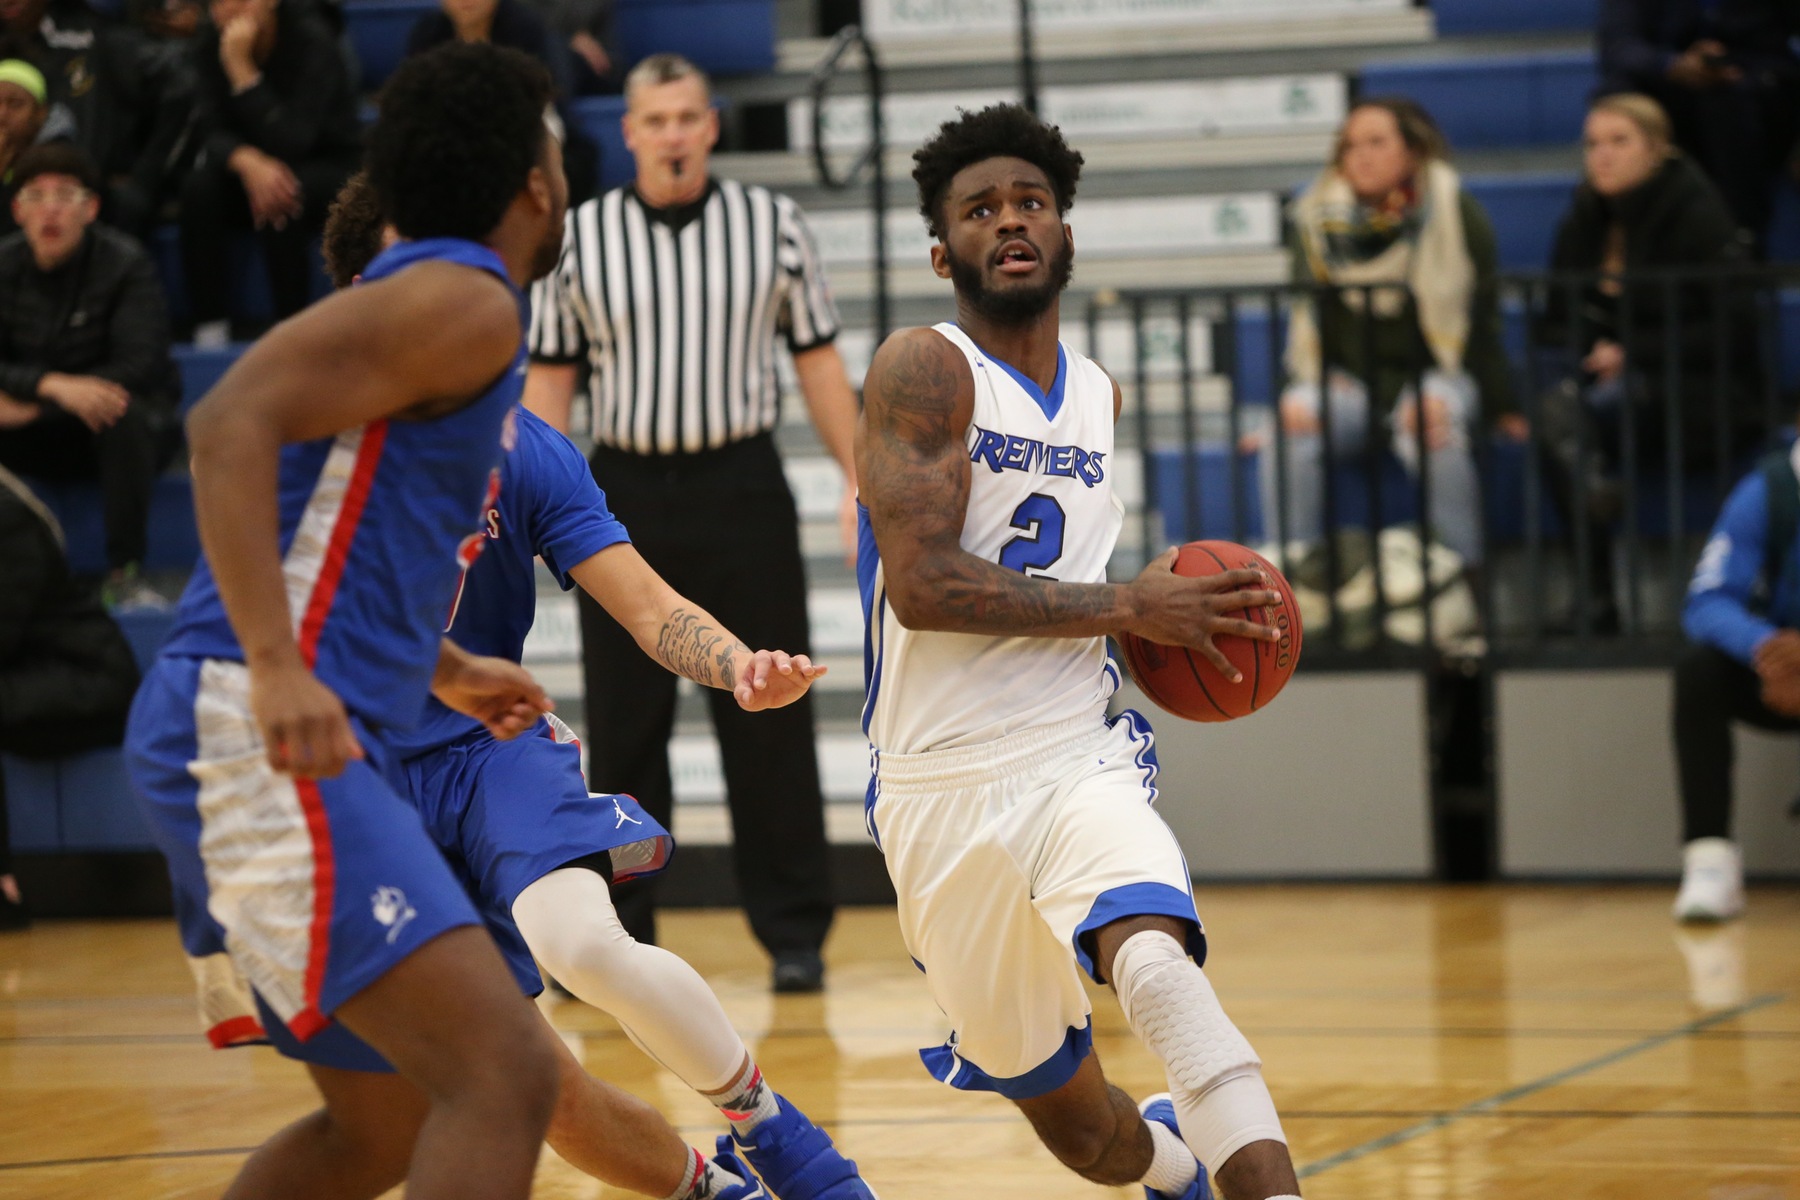 Jevon Smith scored a career high 32 points as Iowa Western defeated Southeastern for the third time this season to advance to the Region XI Championship Game this upcoming Saturday (3/3/18).